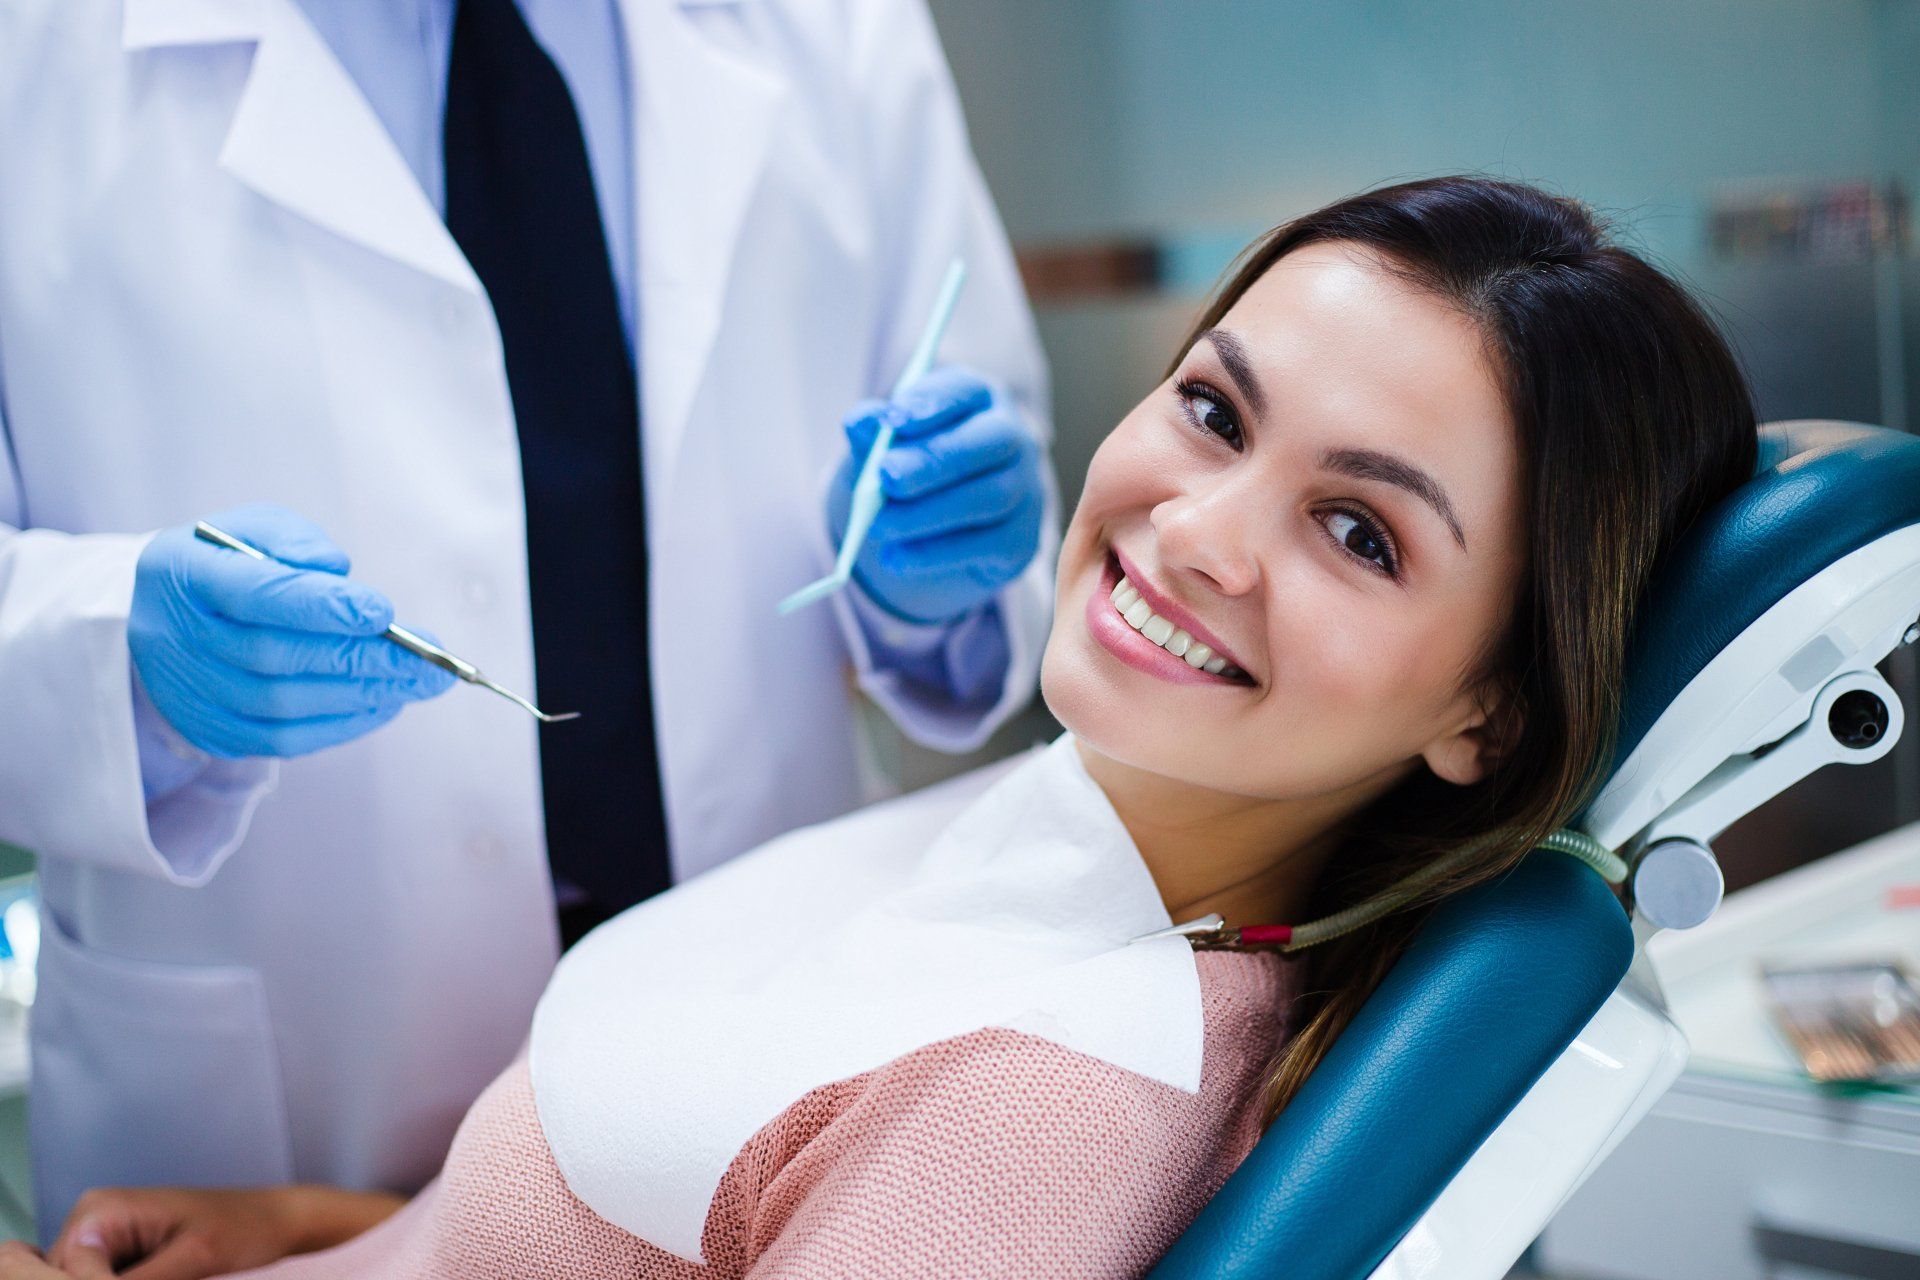 A woman is smiling while sitting in a dental chair while a dentist examines her teeth.